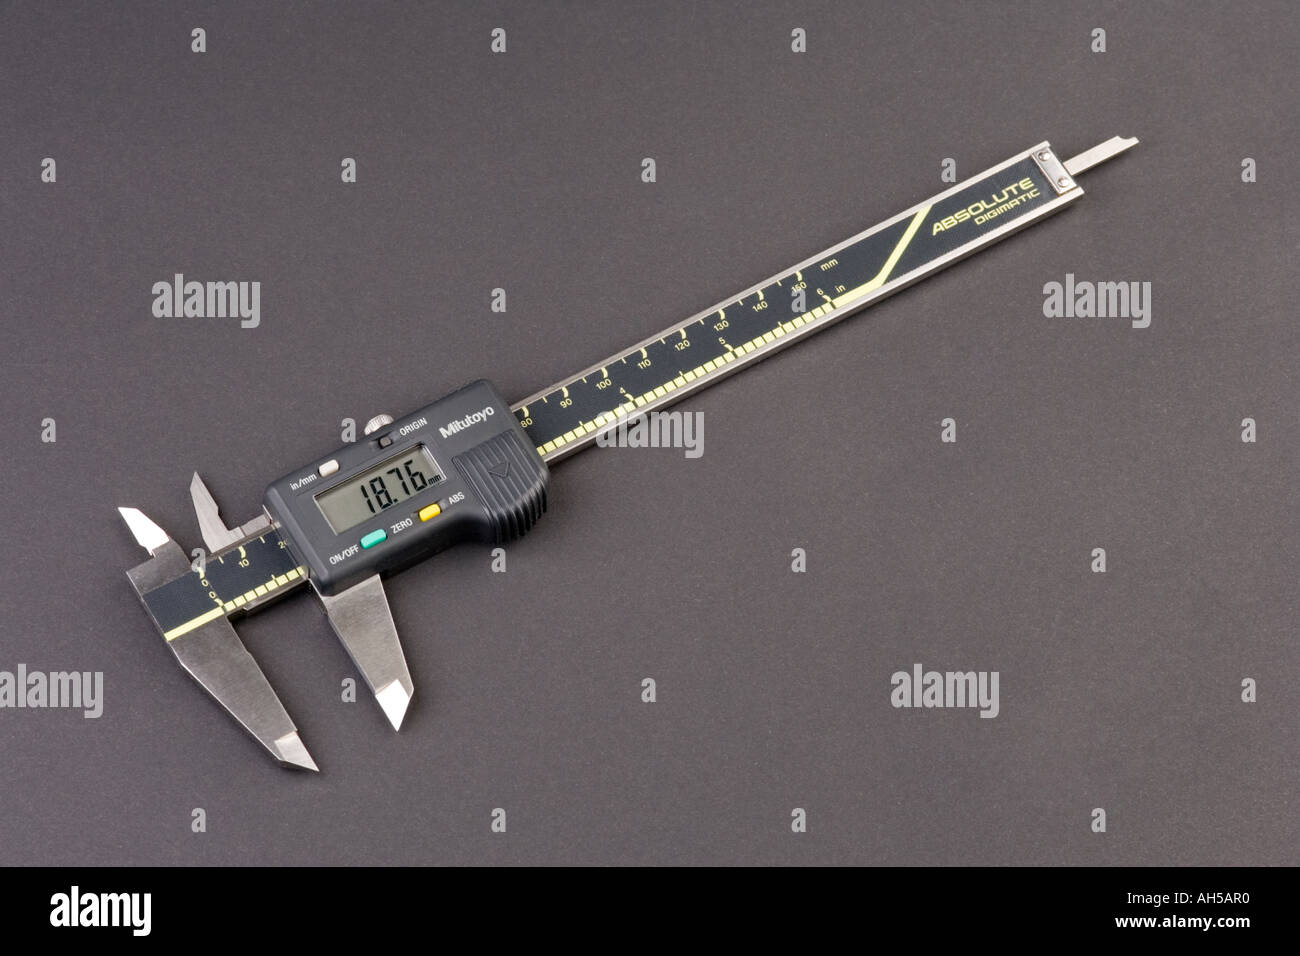 A digital caliper used to measure the size of parts Stock Photo